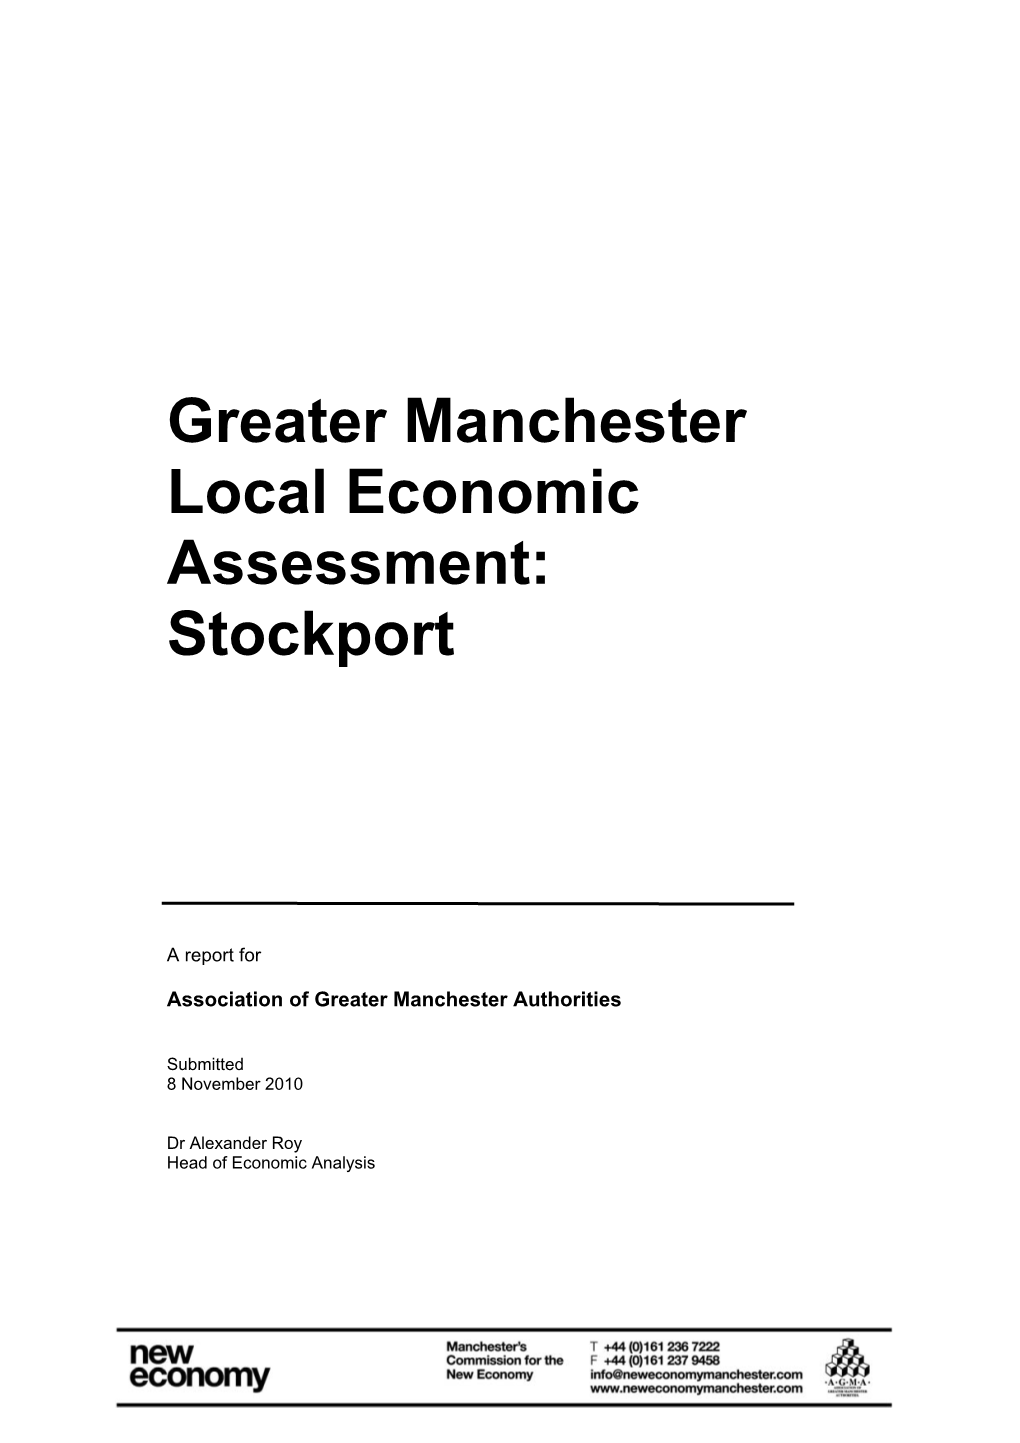 Greater Manchester Local Economic Assessment: Stockport